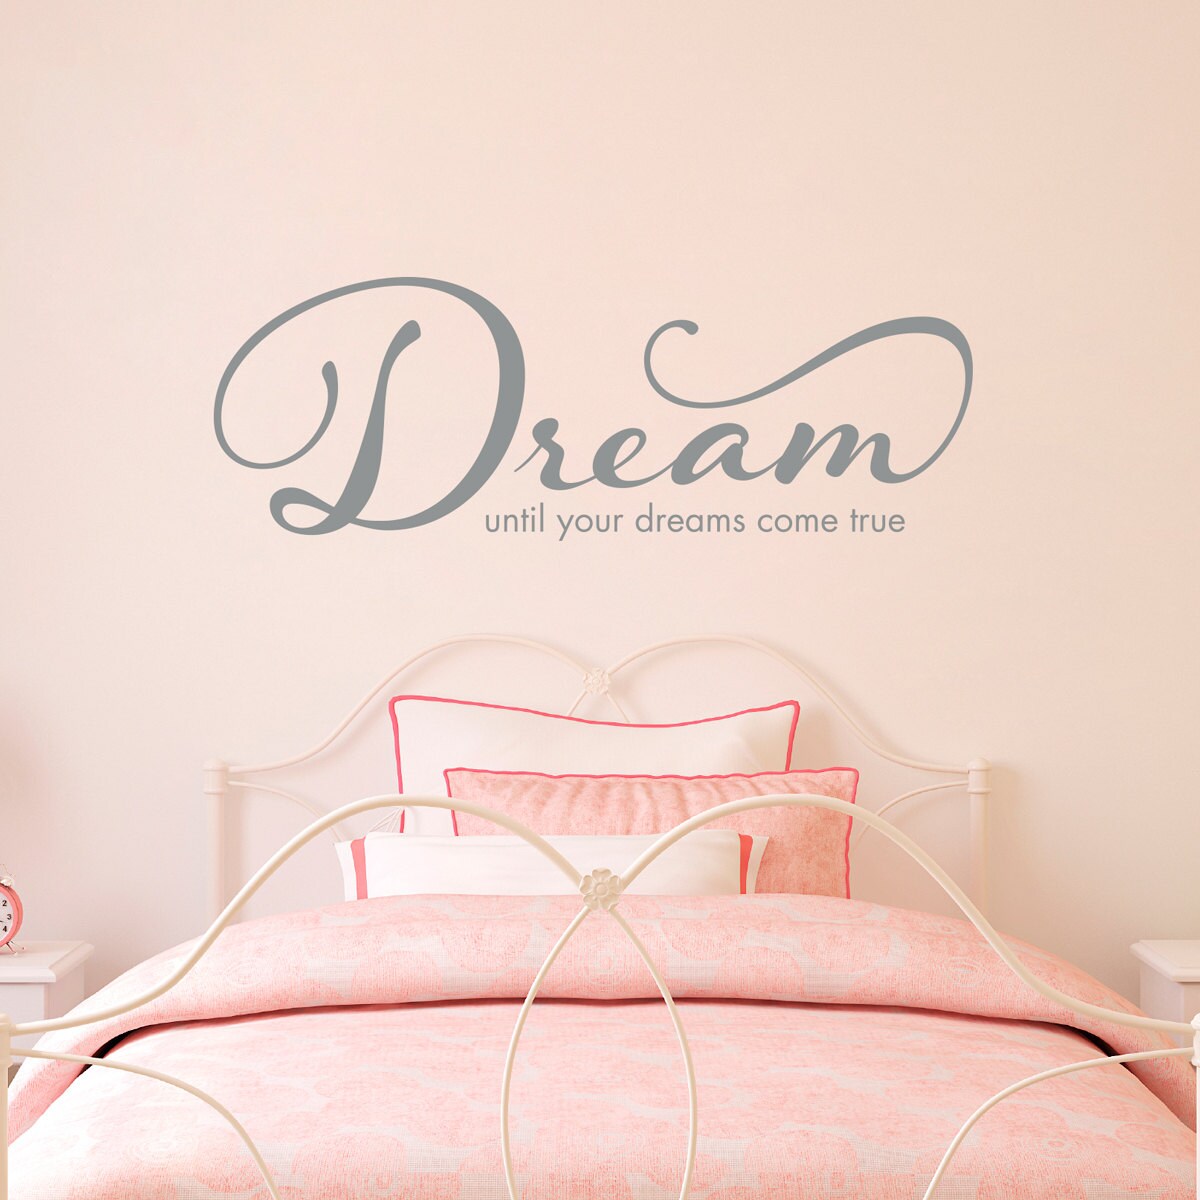 Dream Wall Decal - until your dreams come true Quote Decal - Large